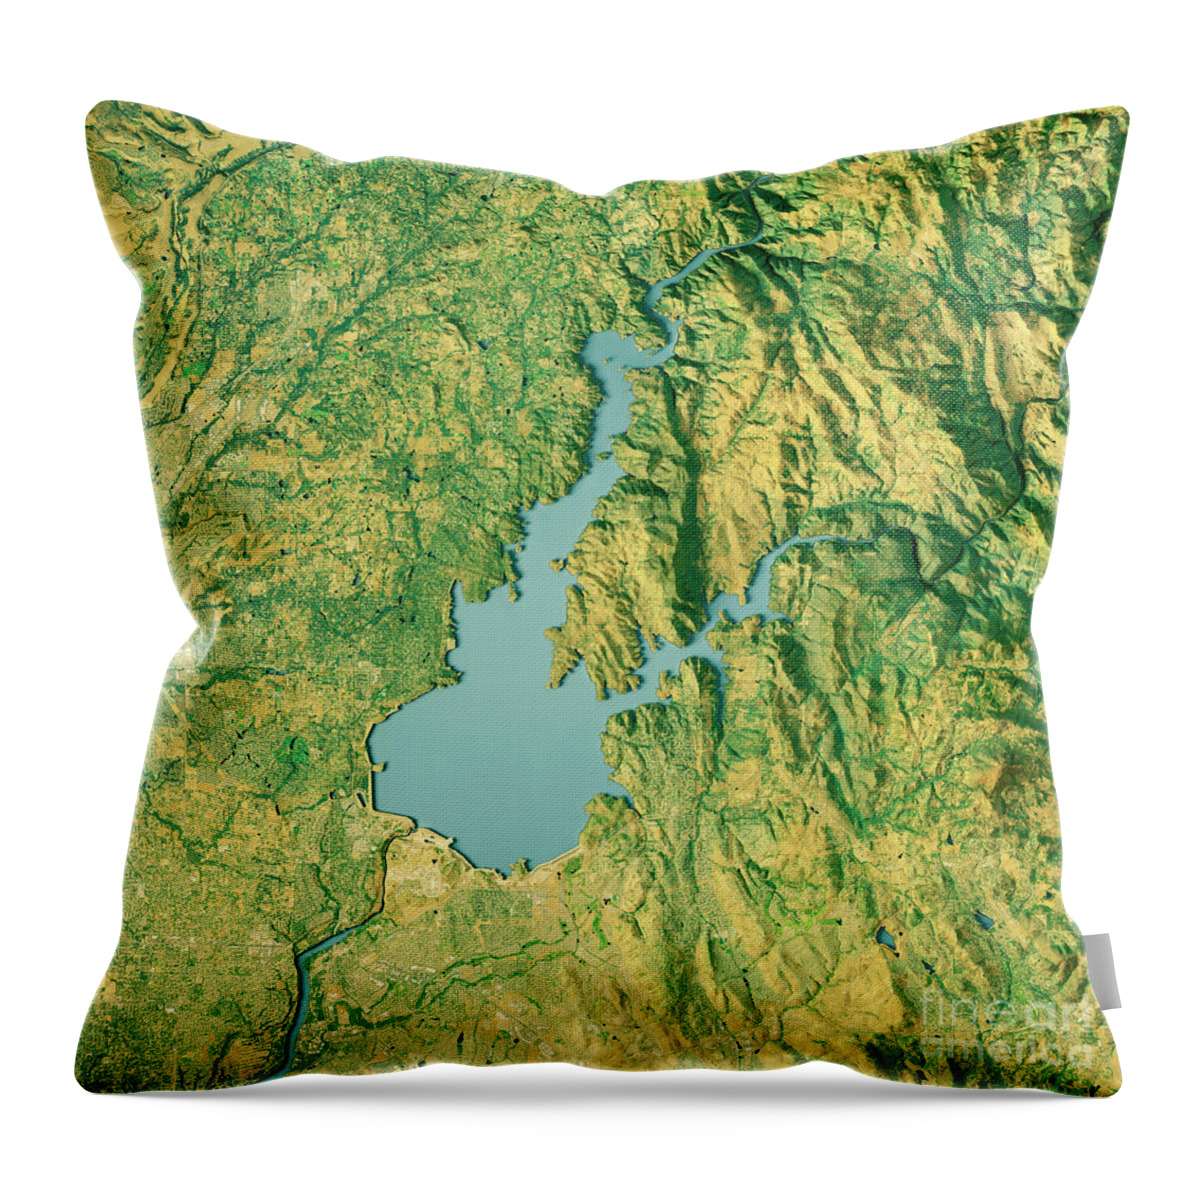 Folsom Lake Throw Pillow featuring the digital art Folsom Lake 3D Render Topographic Map Color by Frank Ramspott